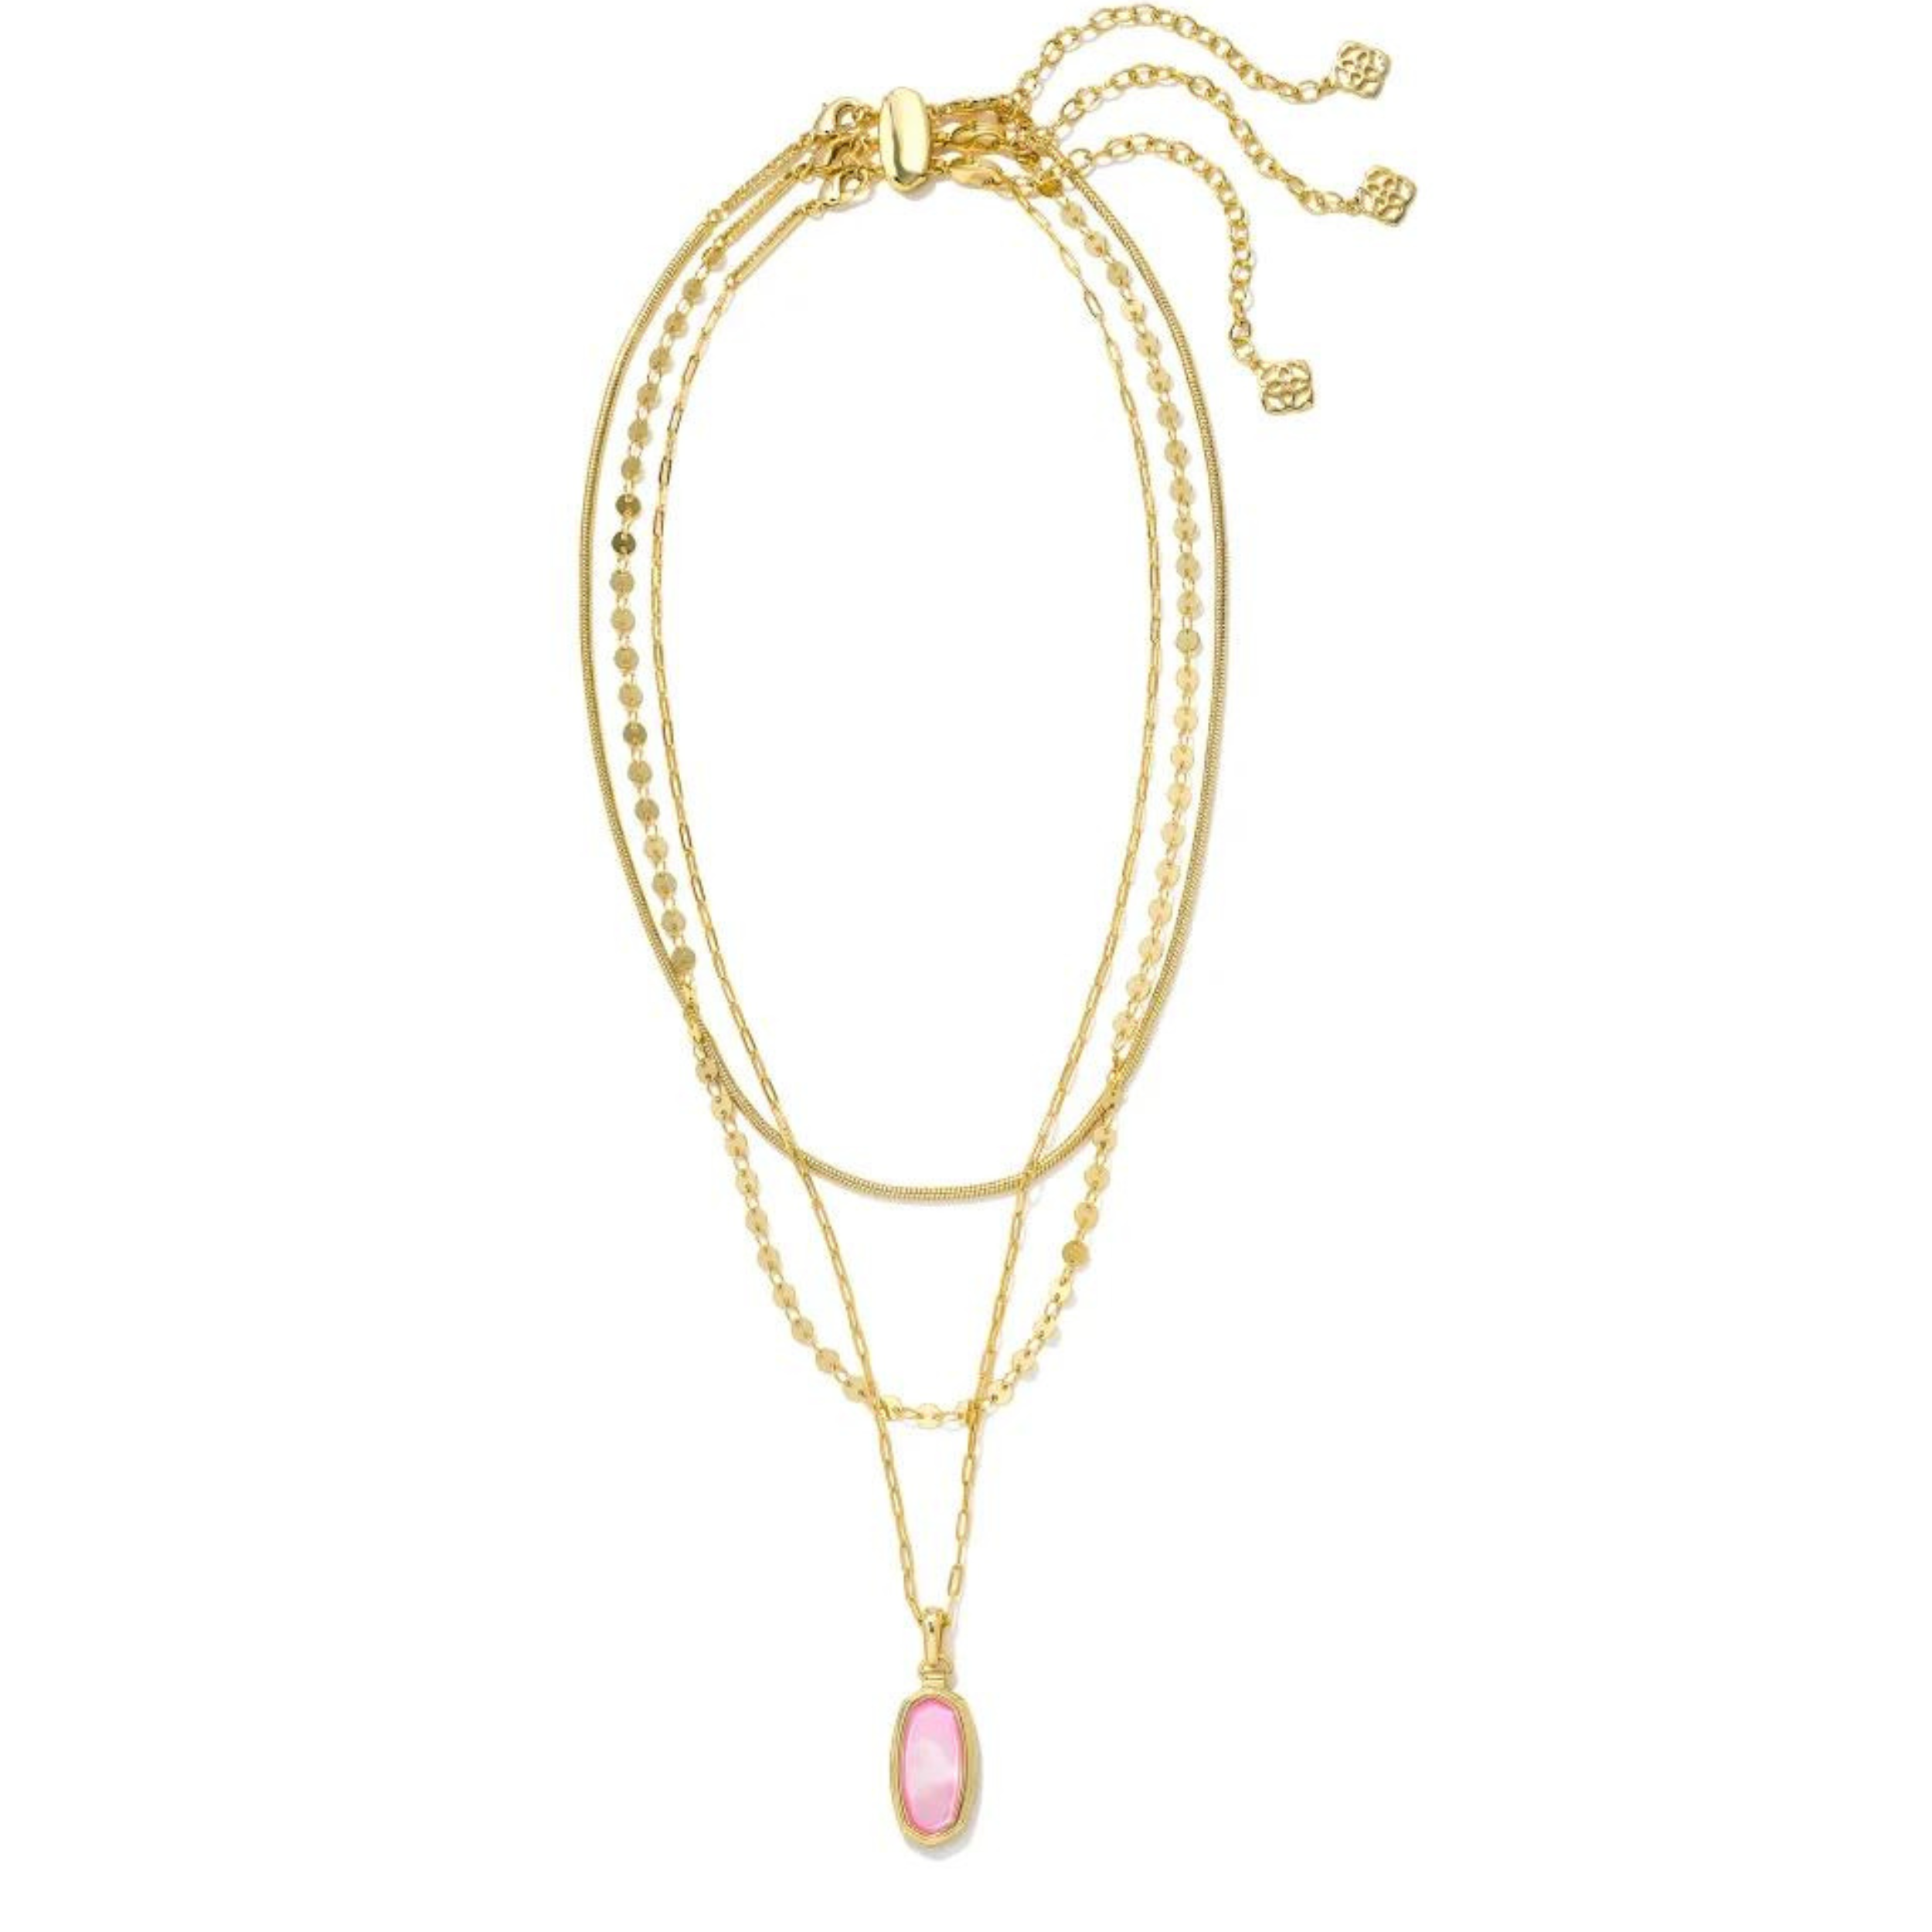 Kendra Scott | Framed Dani Convertible Gold Triple Strand Necklace in Peony Mother of Pearl - Giddy Up Glamour Boutique